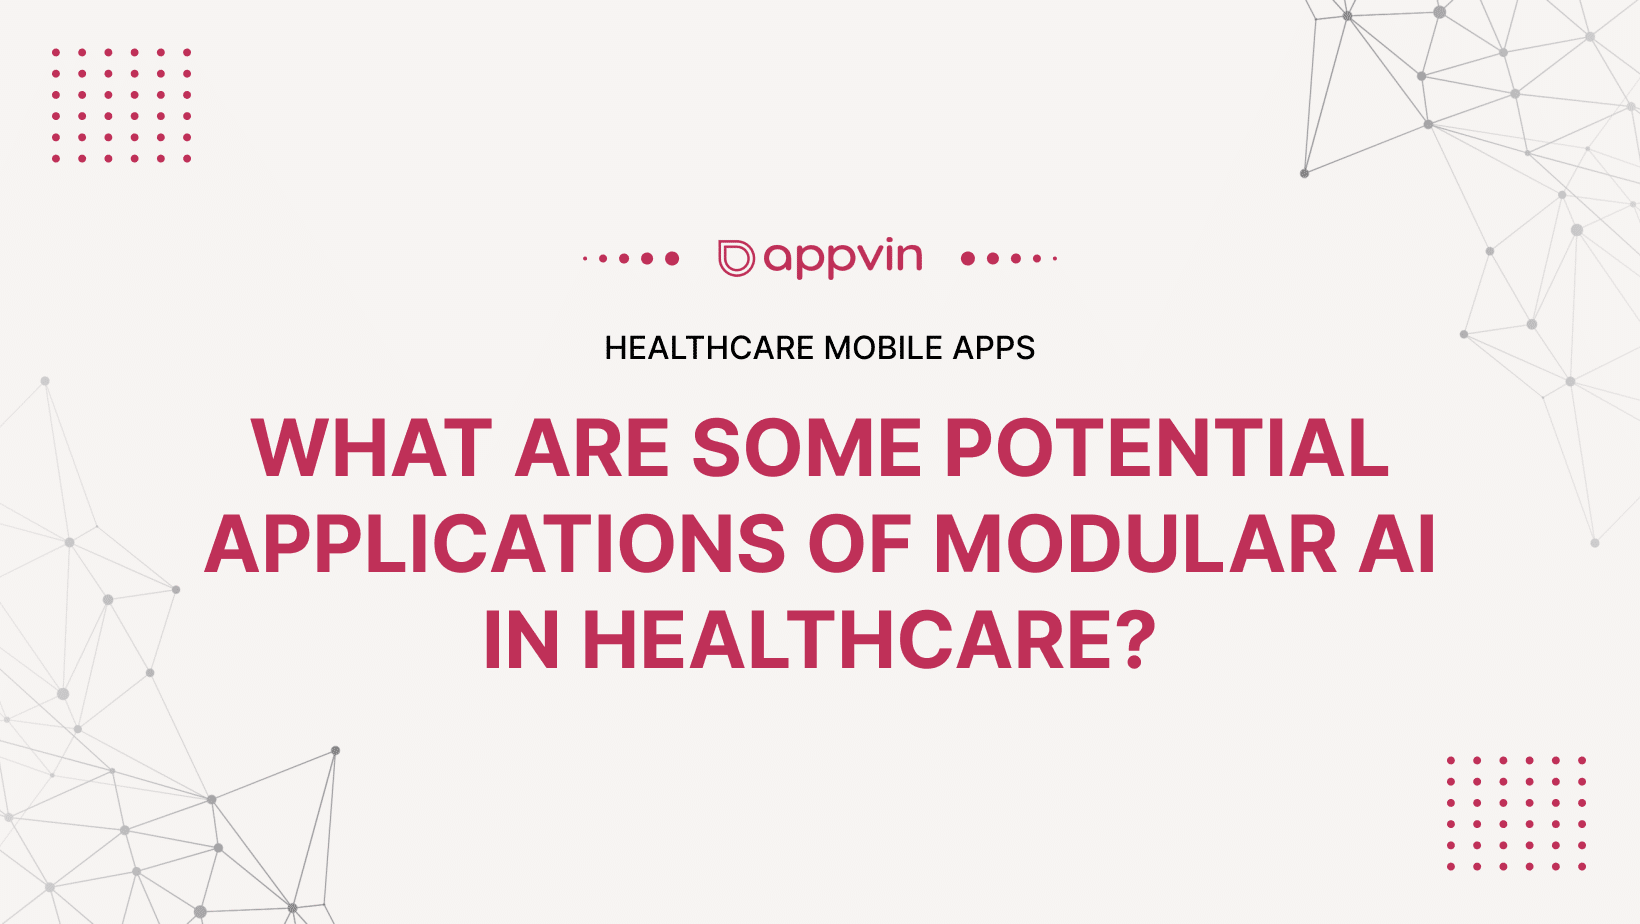 What are some potential applications of modular AI in healthcare